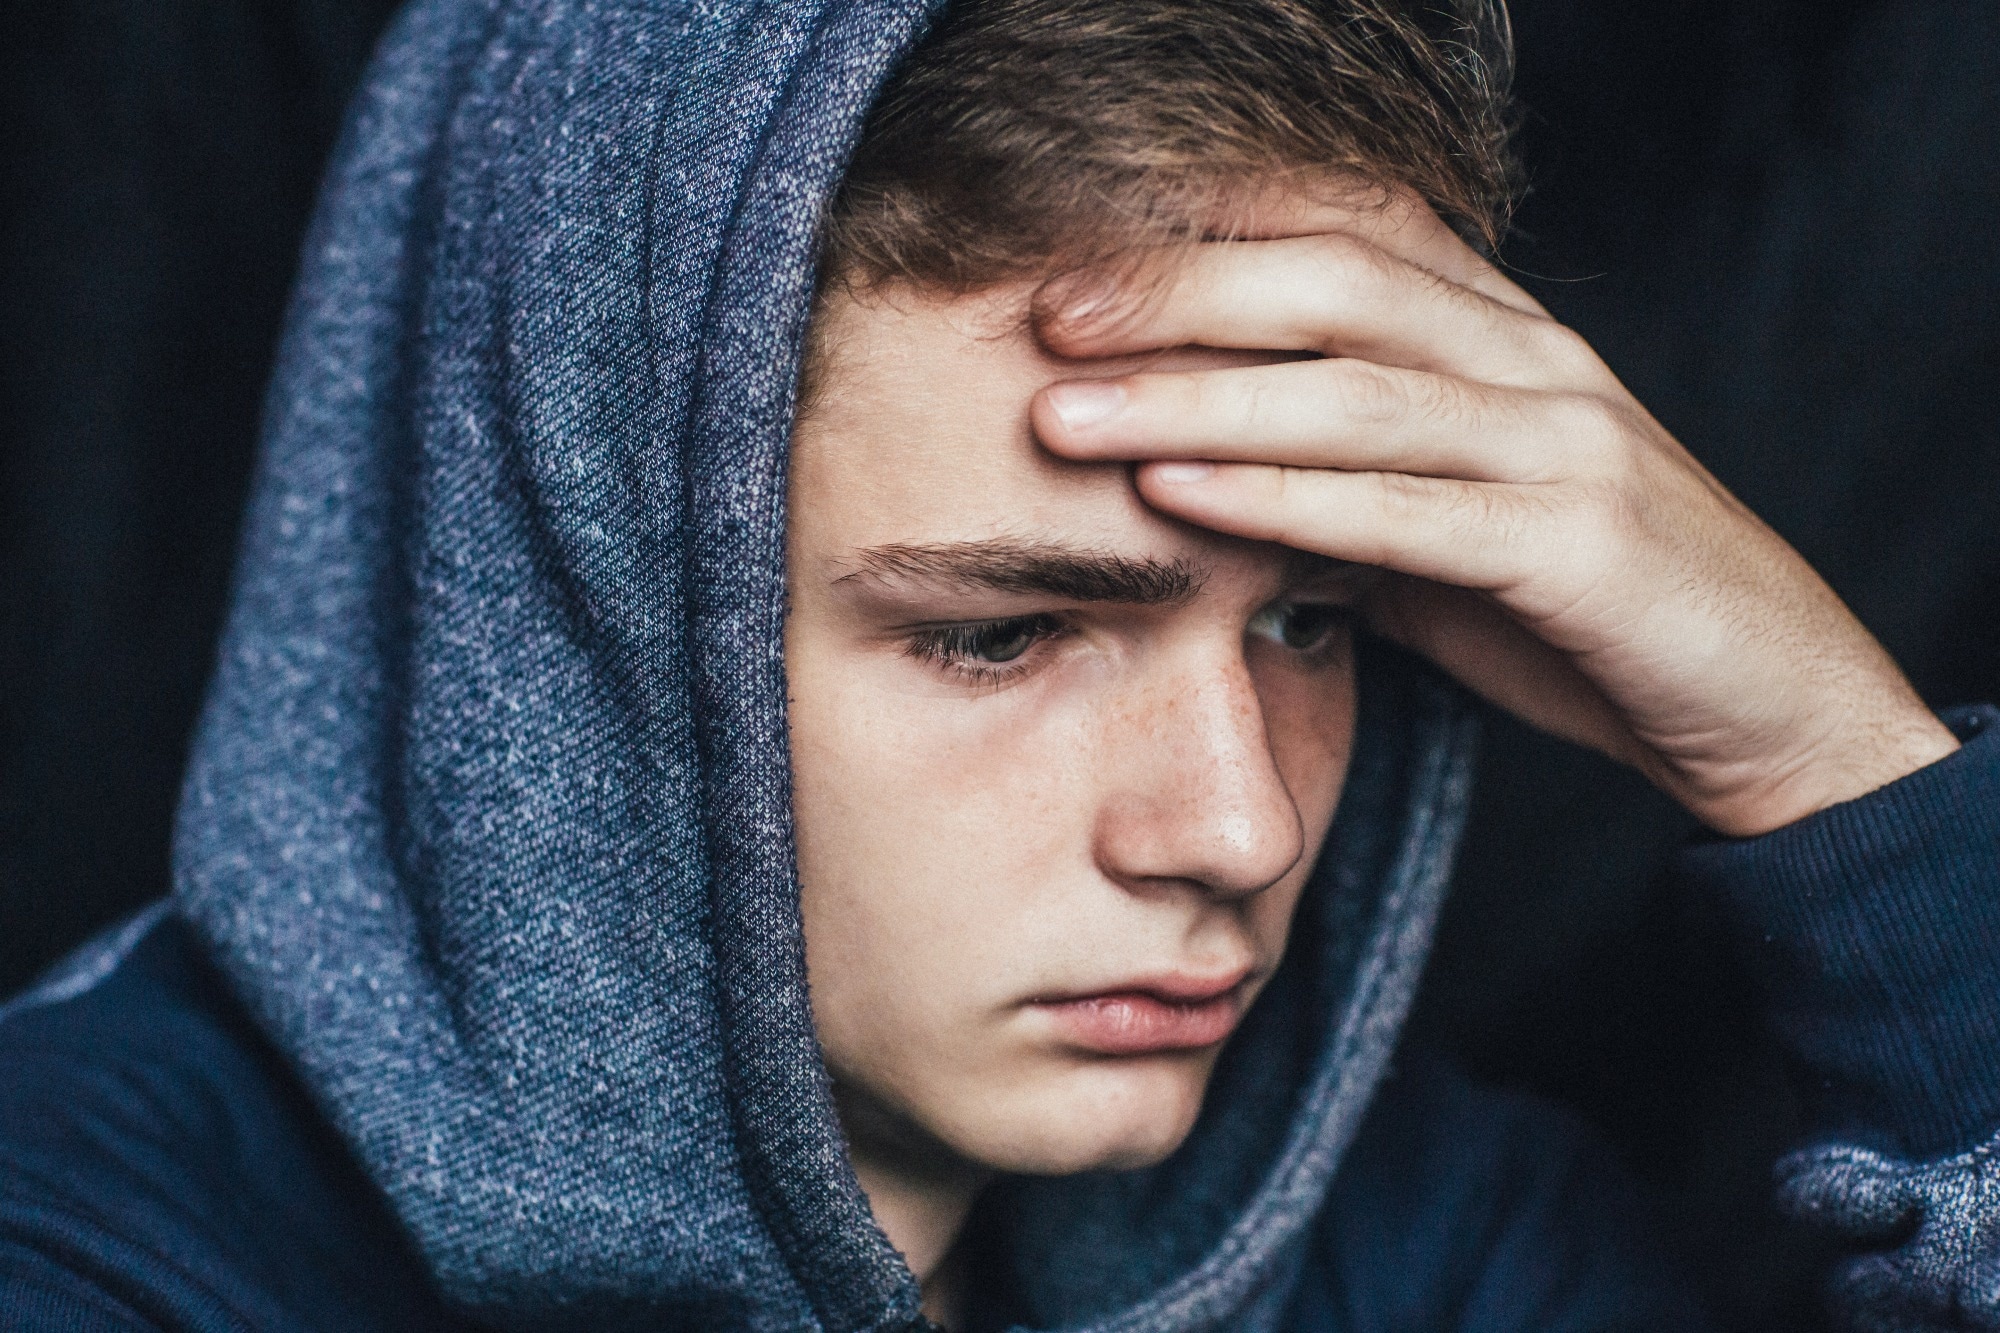 Study: Acute and long-term effects of adolescence stress exposure on rodent adult hippocampal neurogenesis, cognition, and behaviour. Image Credit: polya_olya / Shutterstock.com